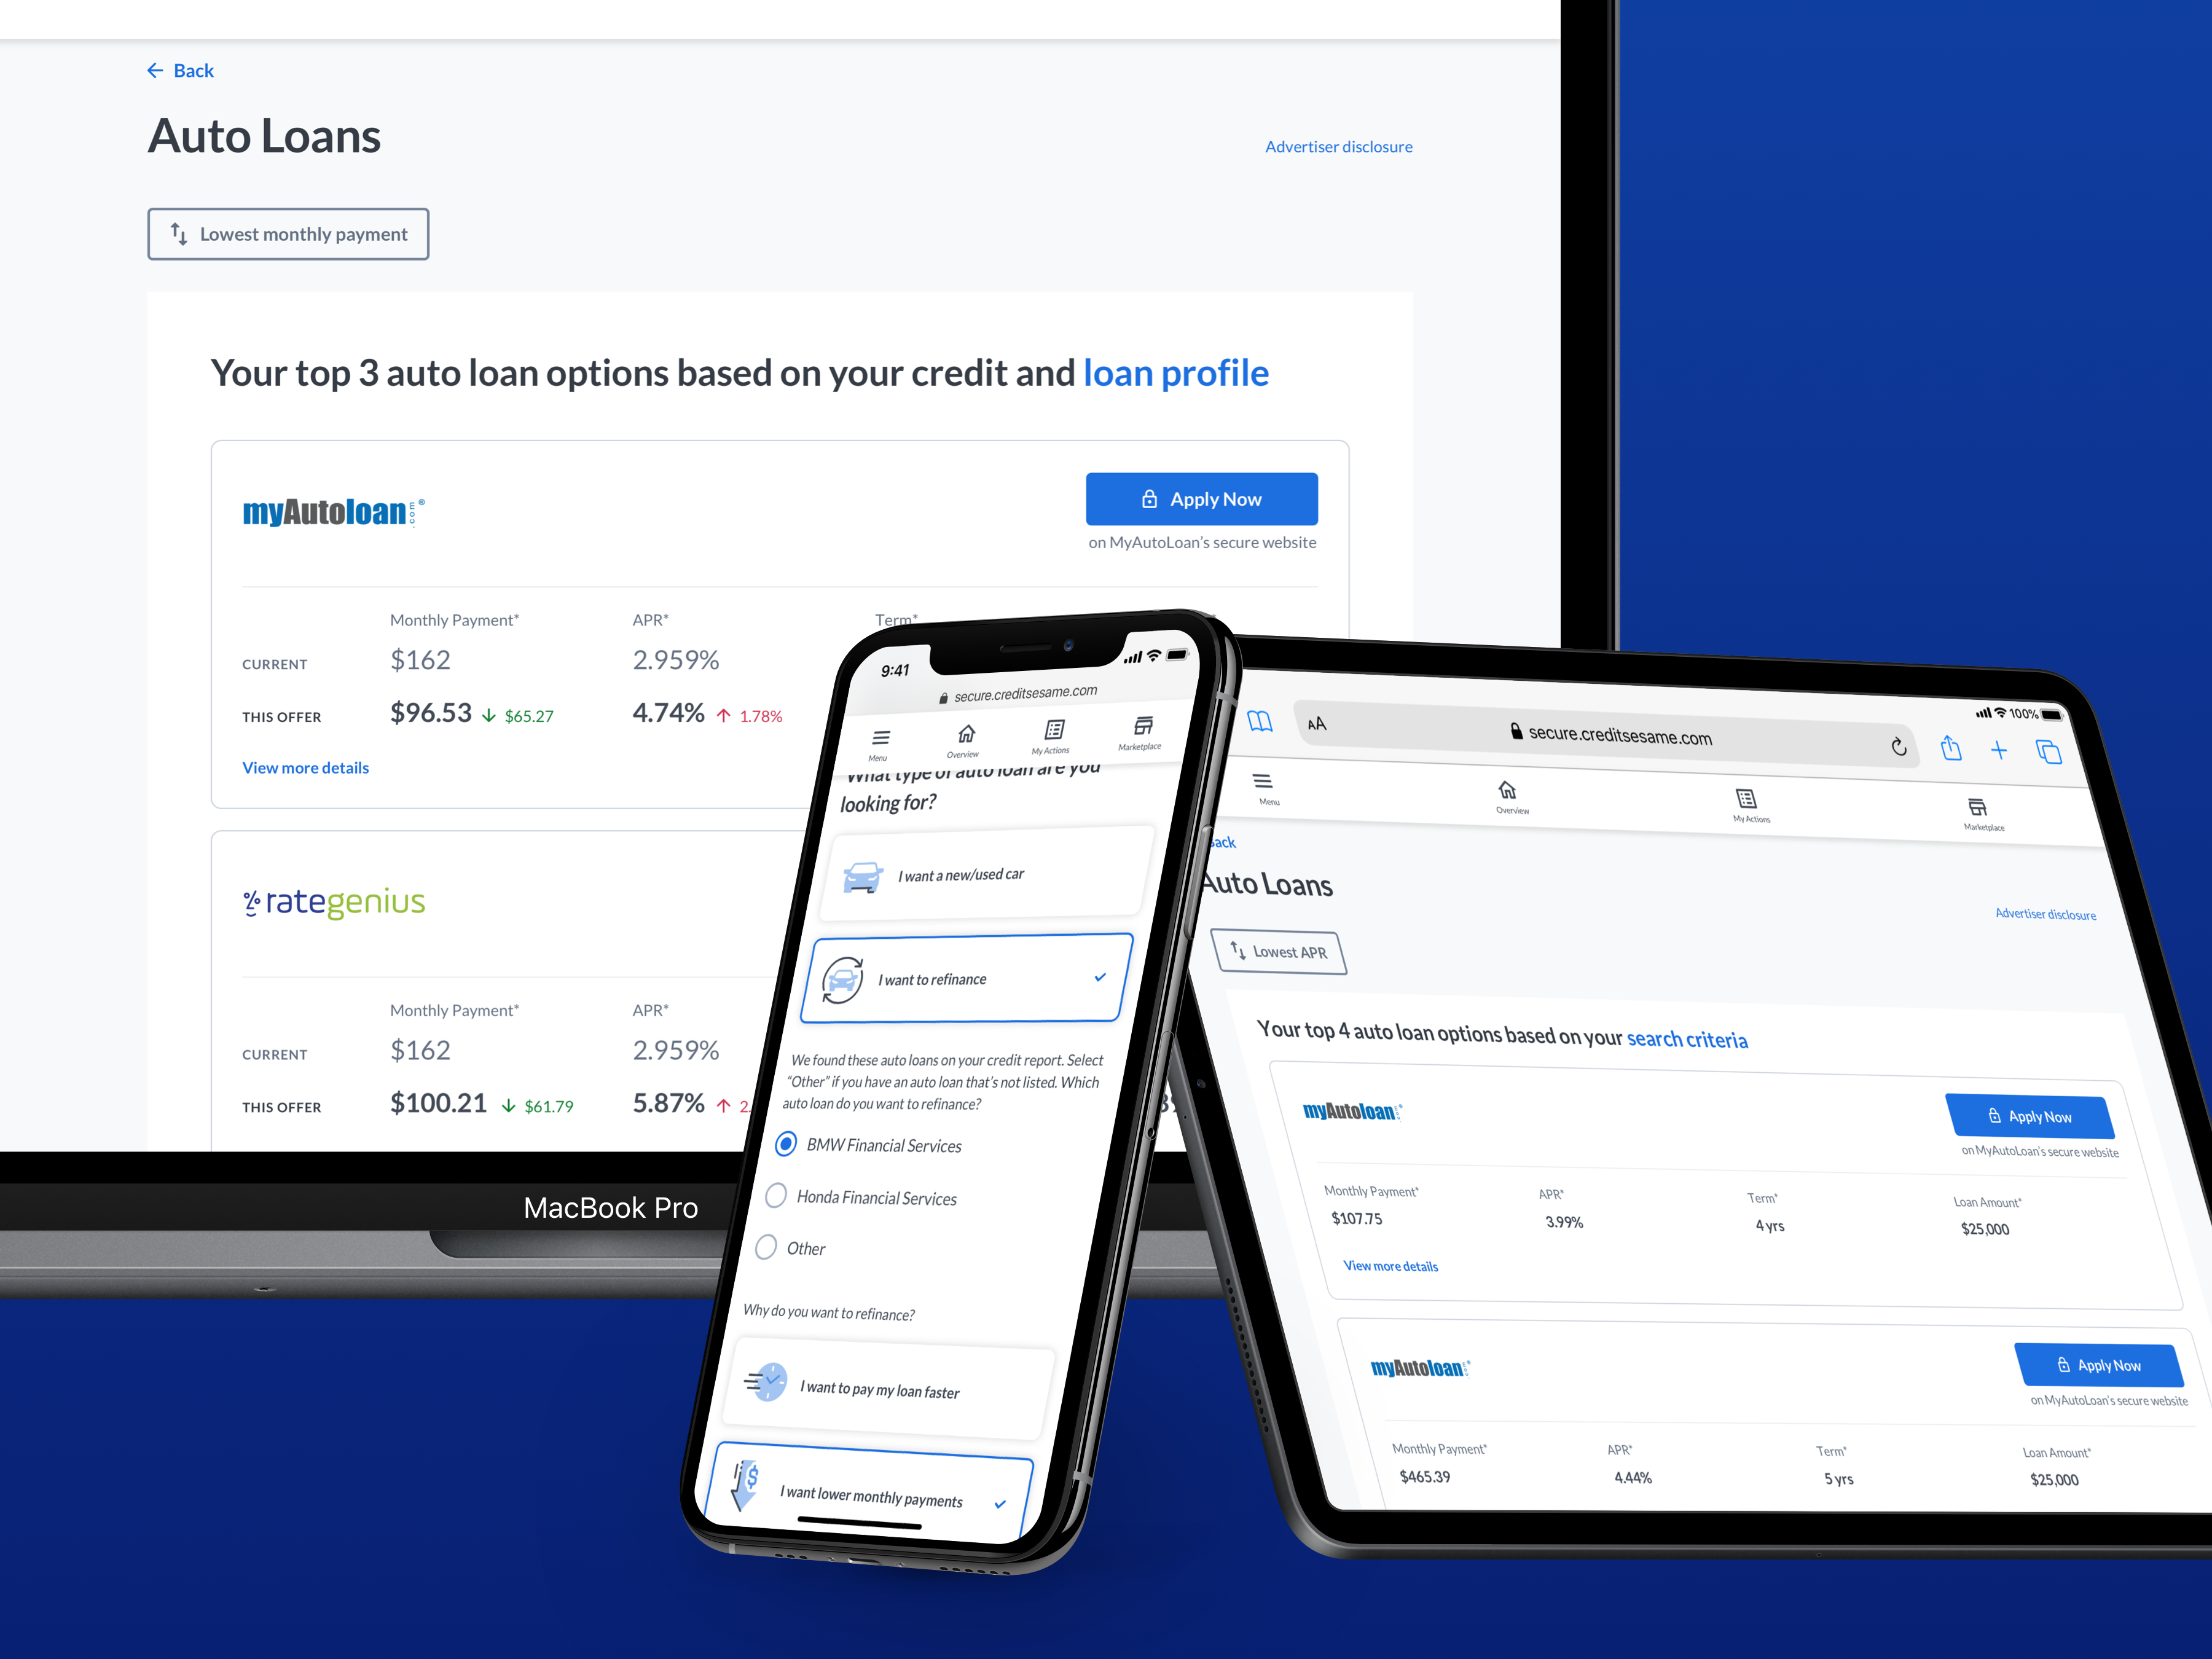 Credit Sesame Auto Loan redesign on macbook, ipad, and iphone 11 pro